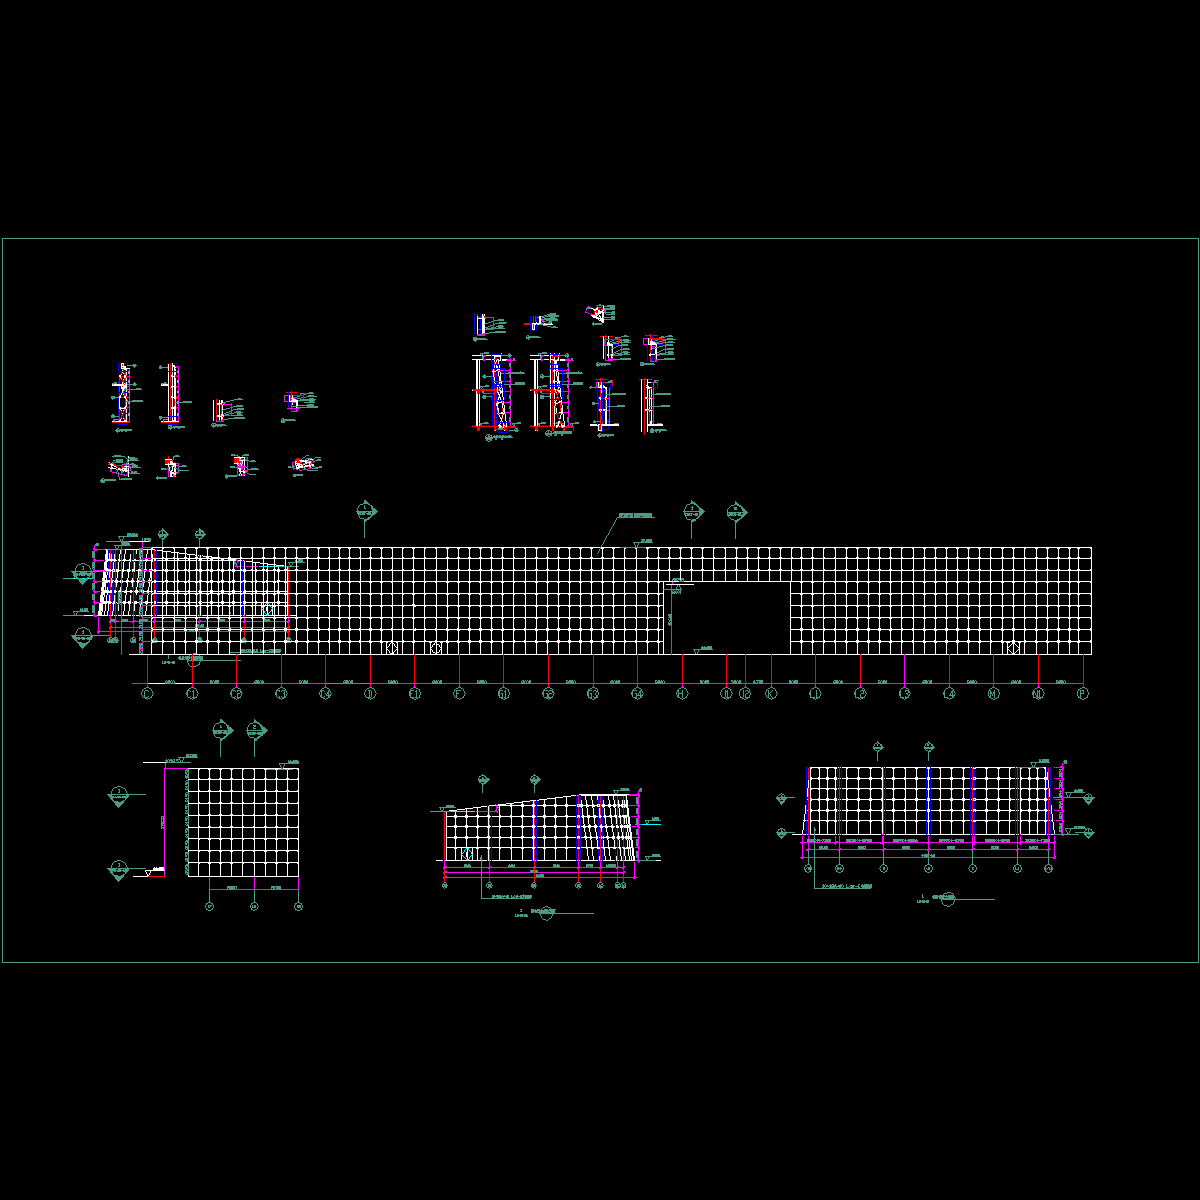 sect-02.dwg